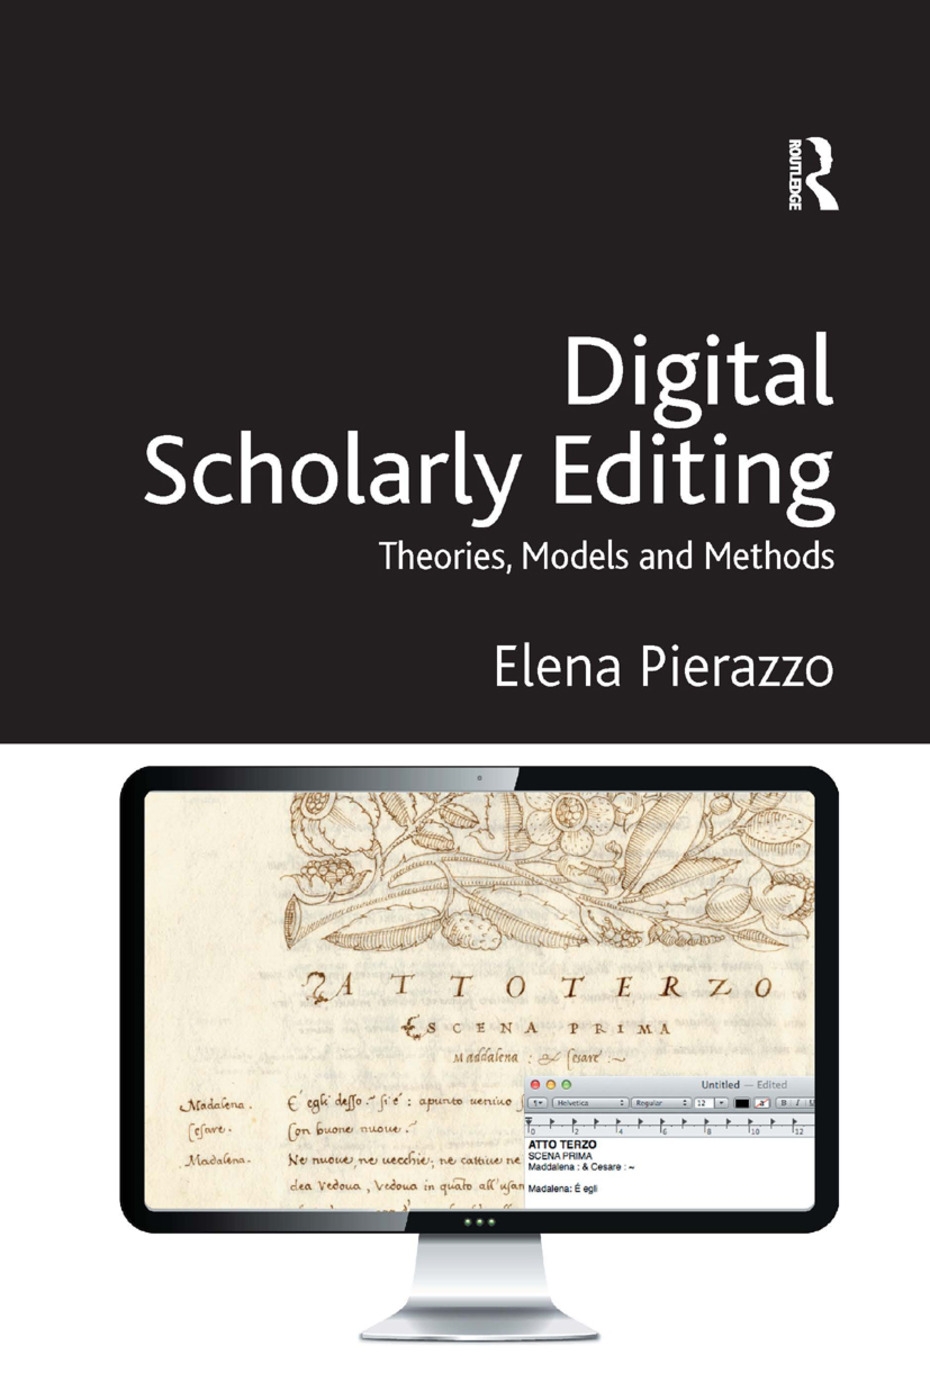 Digital Scholarly Editing: Theories, Models and Methods